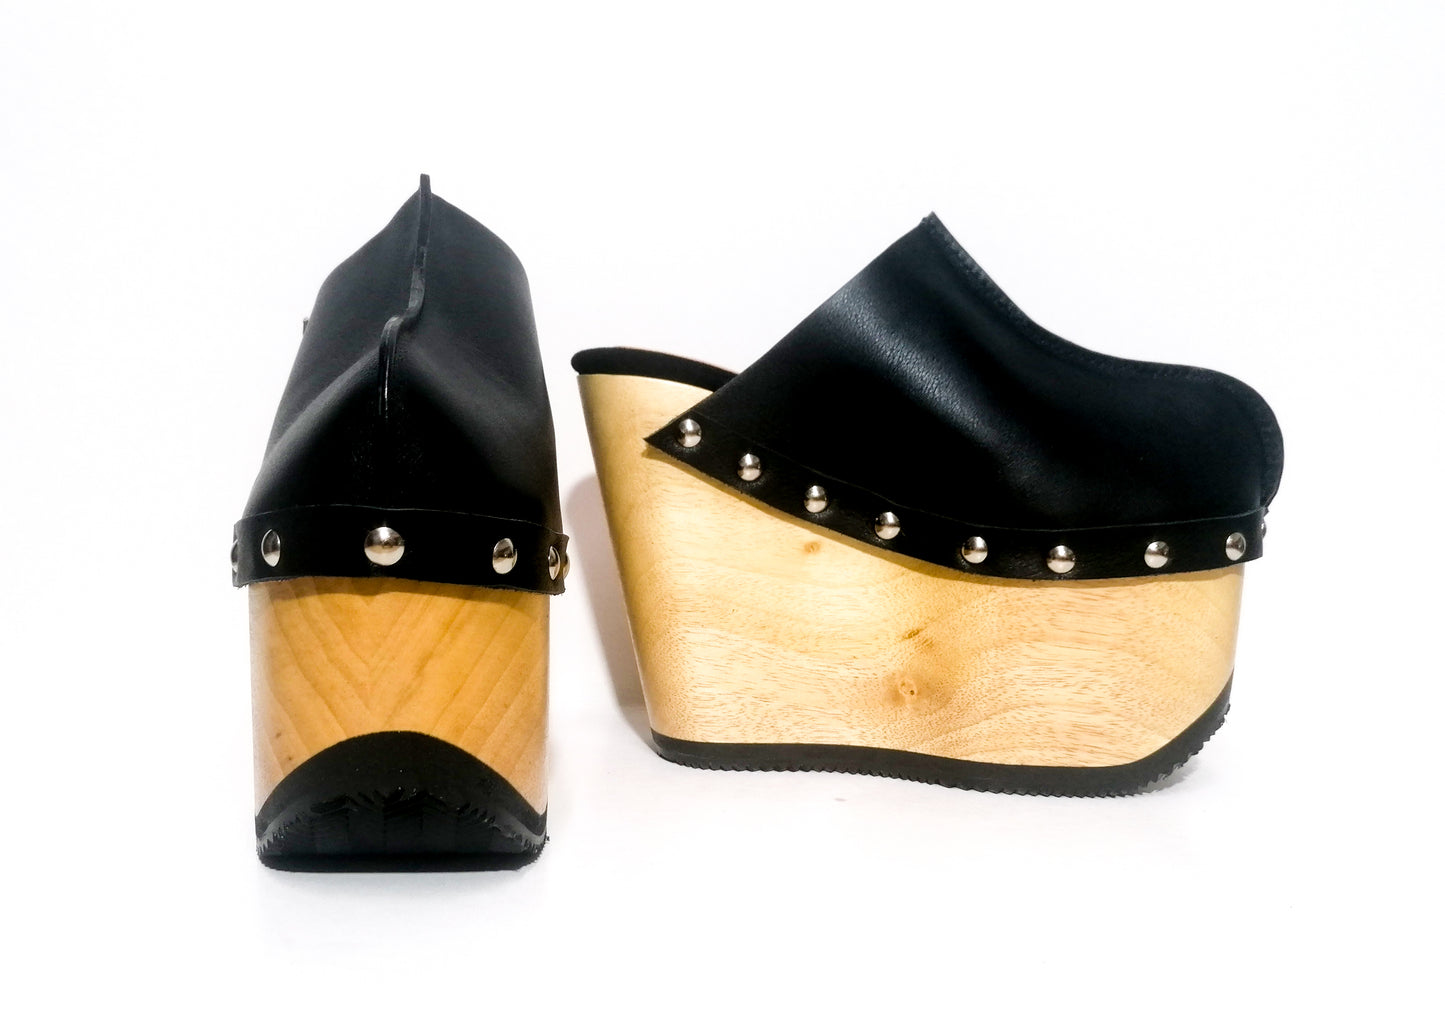 Black platform clog vintage style 70s. Super high wooden wedge, closed leather clogs, vintage style wooden wedge. Sizes 34 to 47. High quality leather shoes handmade by Sol Caleyo.